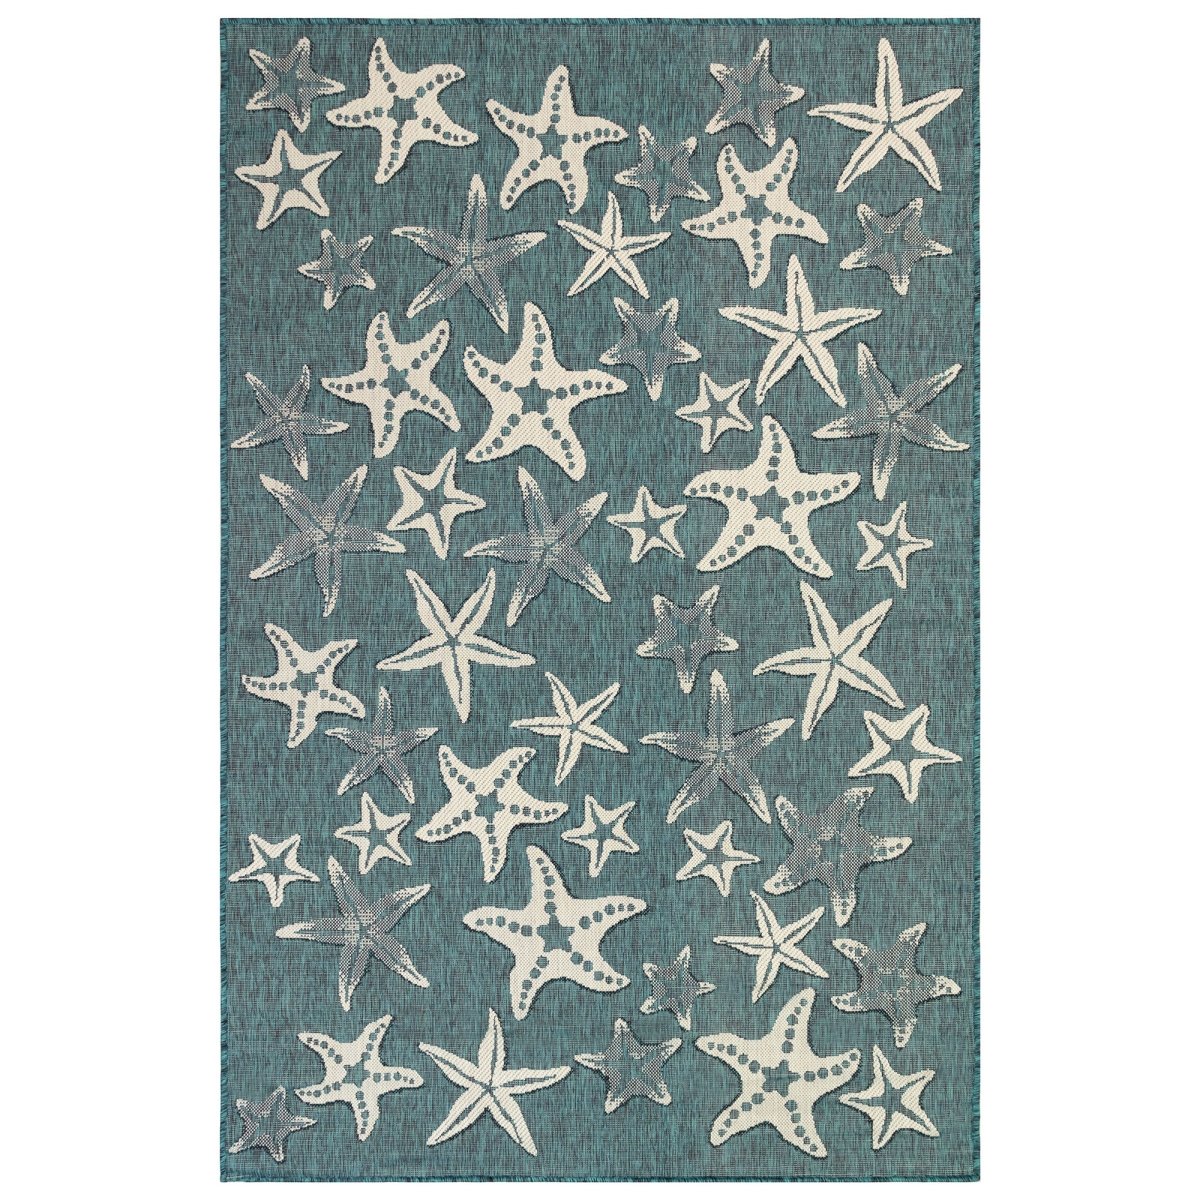 Cre69841594 Liora Manne Carmel Starfish Indoor & Outdoor Rug, Teal - 6 Ft. 6 In. X 9 Ft. 4 In.